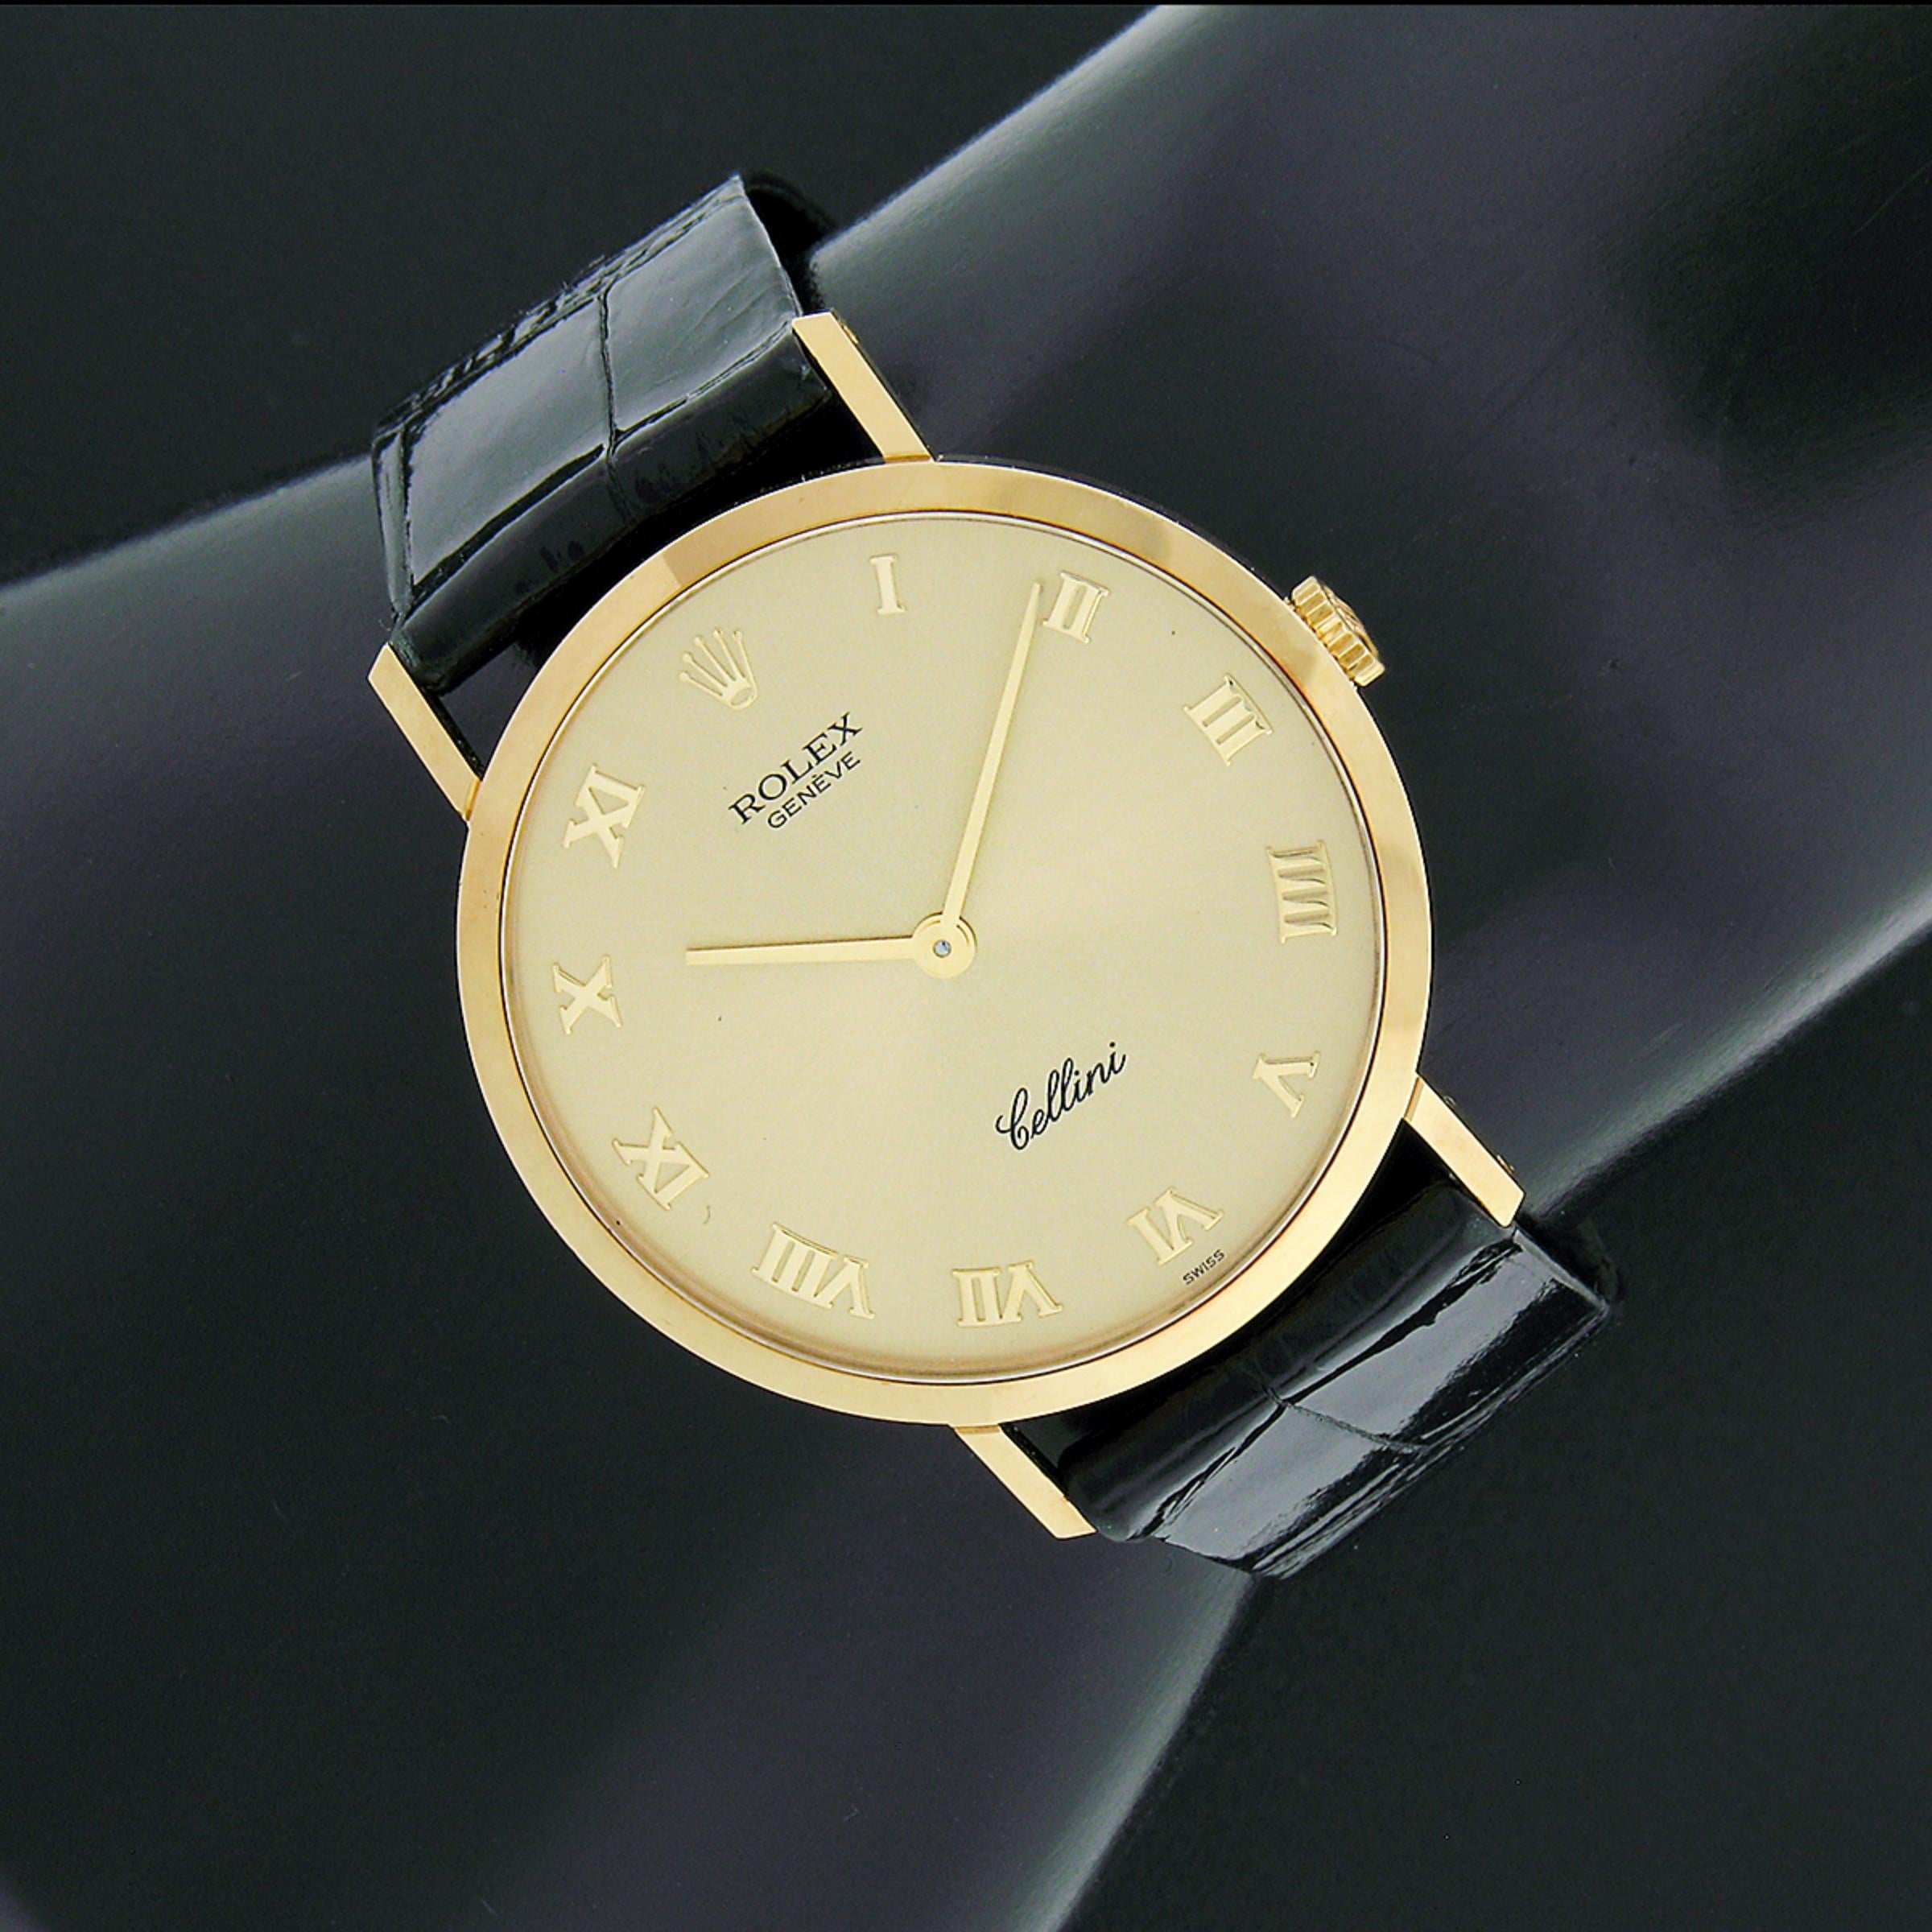 Here we have a gorgeous, 100% authentic, Rolex Cellini made from solid 18k yellow gold. This watch features an elegant 32mm case with smooth bezel and its original black crocodile strap with its original solid 18k yellow gold buckle and tang. The